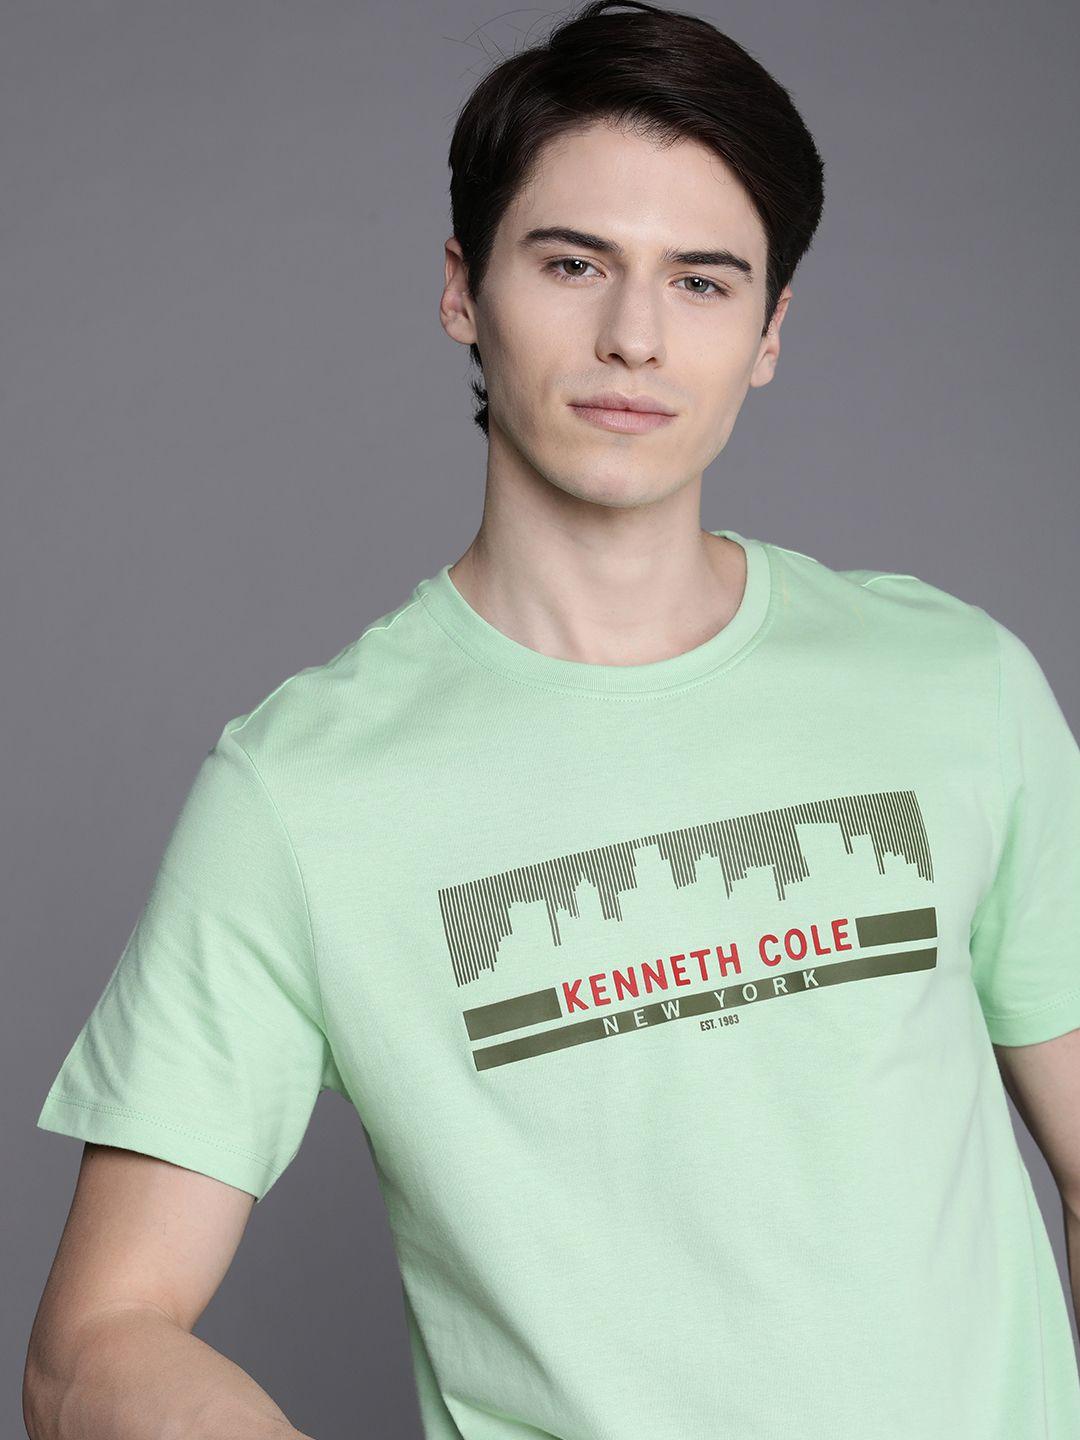 kenneth-cole-voice-tee-men-green-brand-logo-printed-pure-cotton-t-shirt